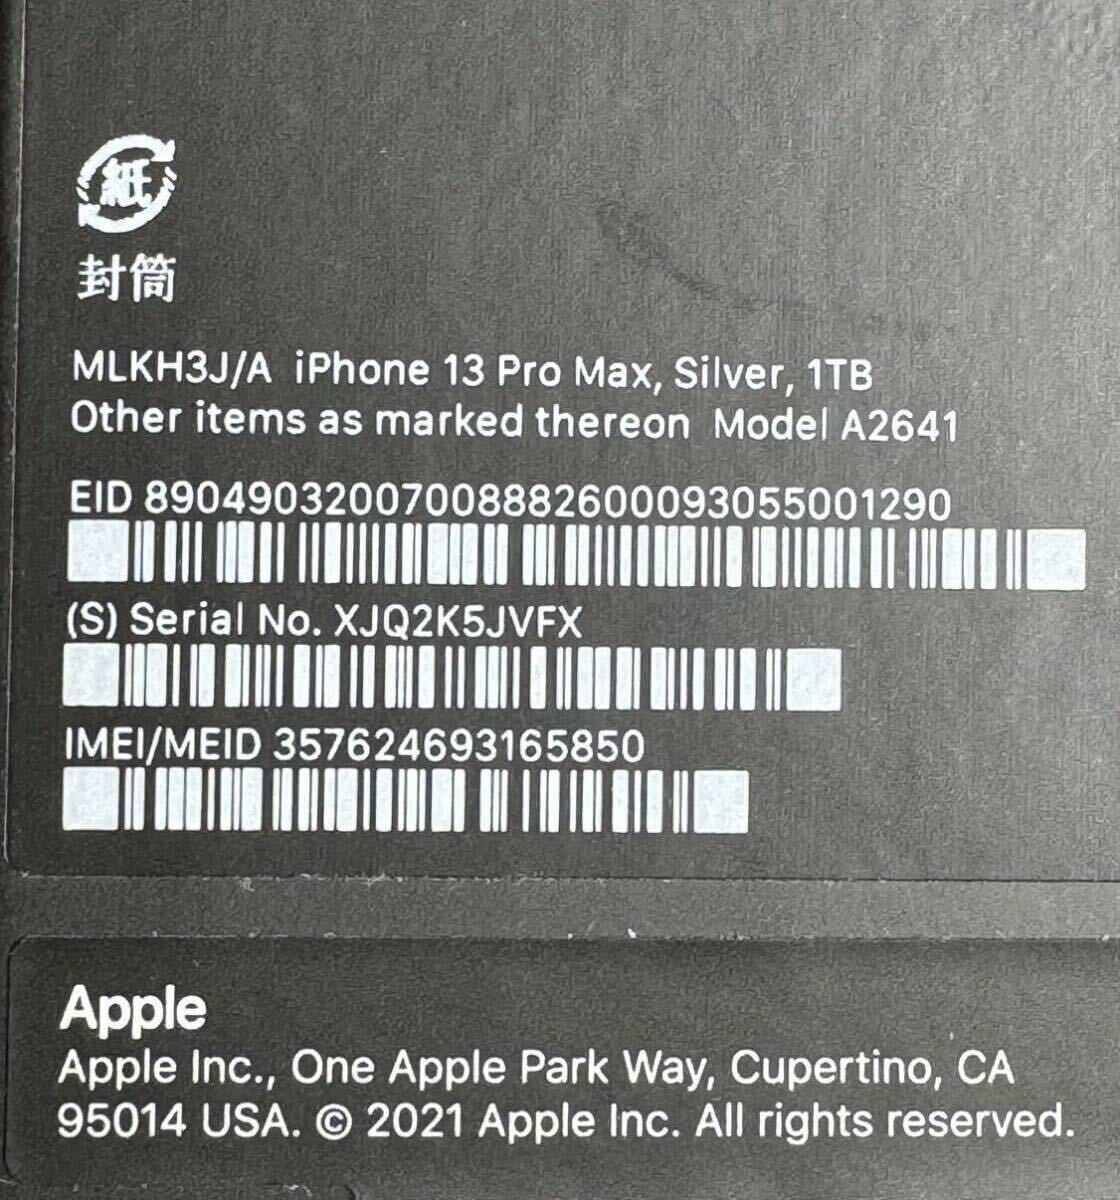  domestic version SIM free model Apple iPhone 13 Pro Max 1TB silver [MLKH3J/A] used the first period . ending box fixtures attaching 